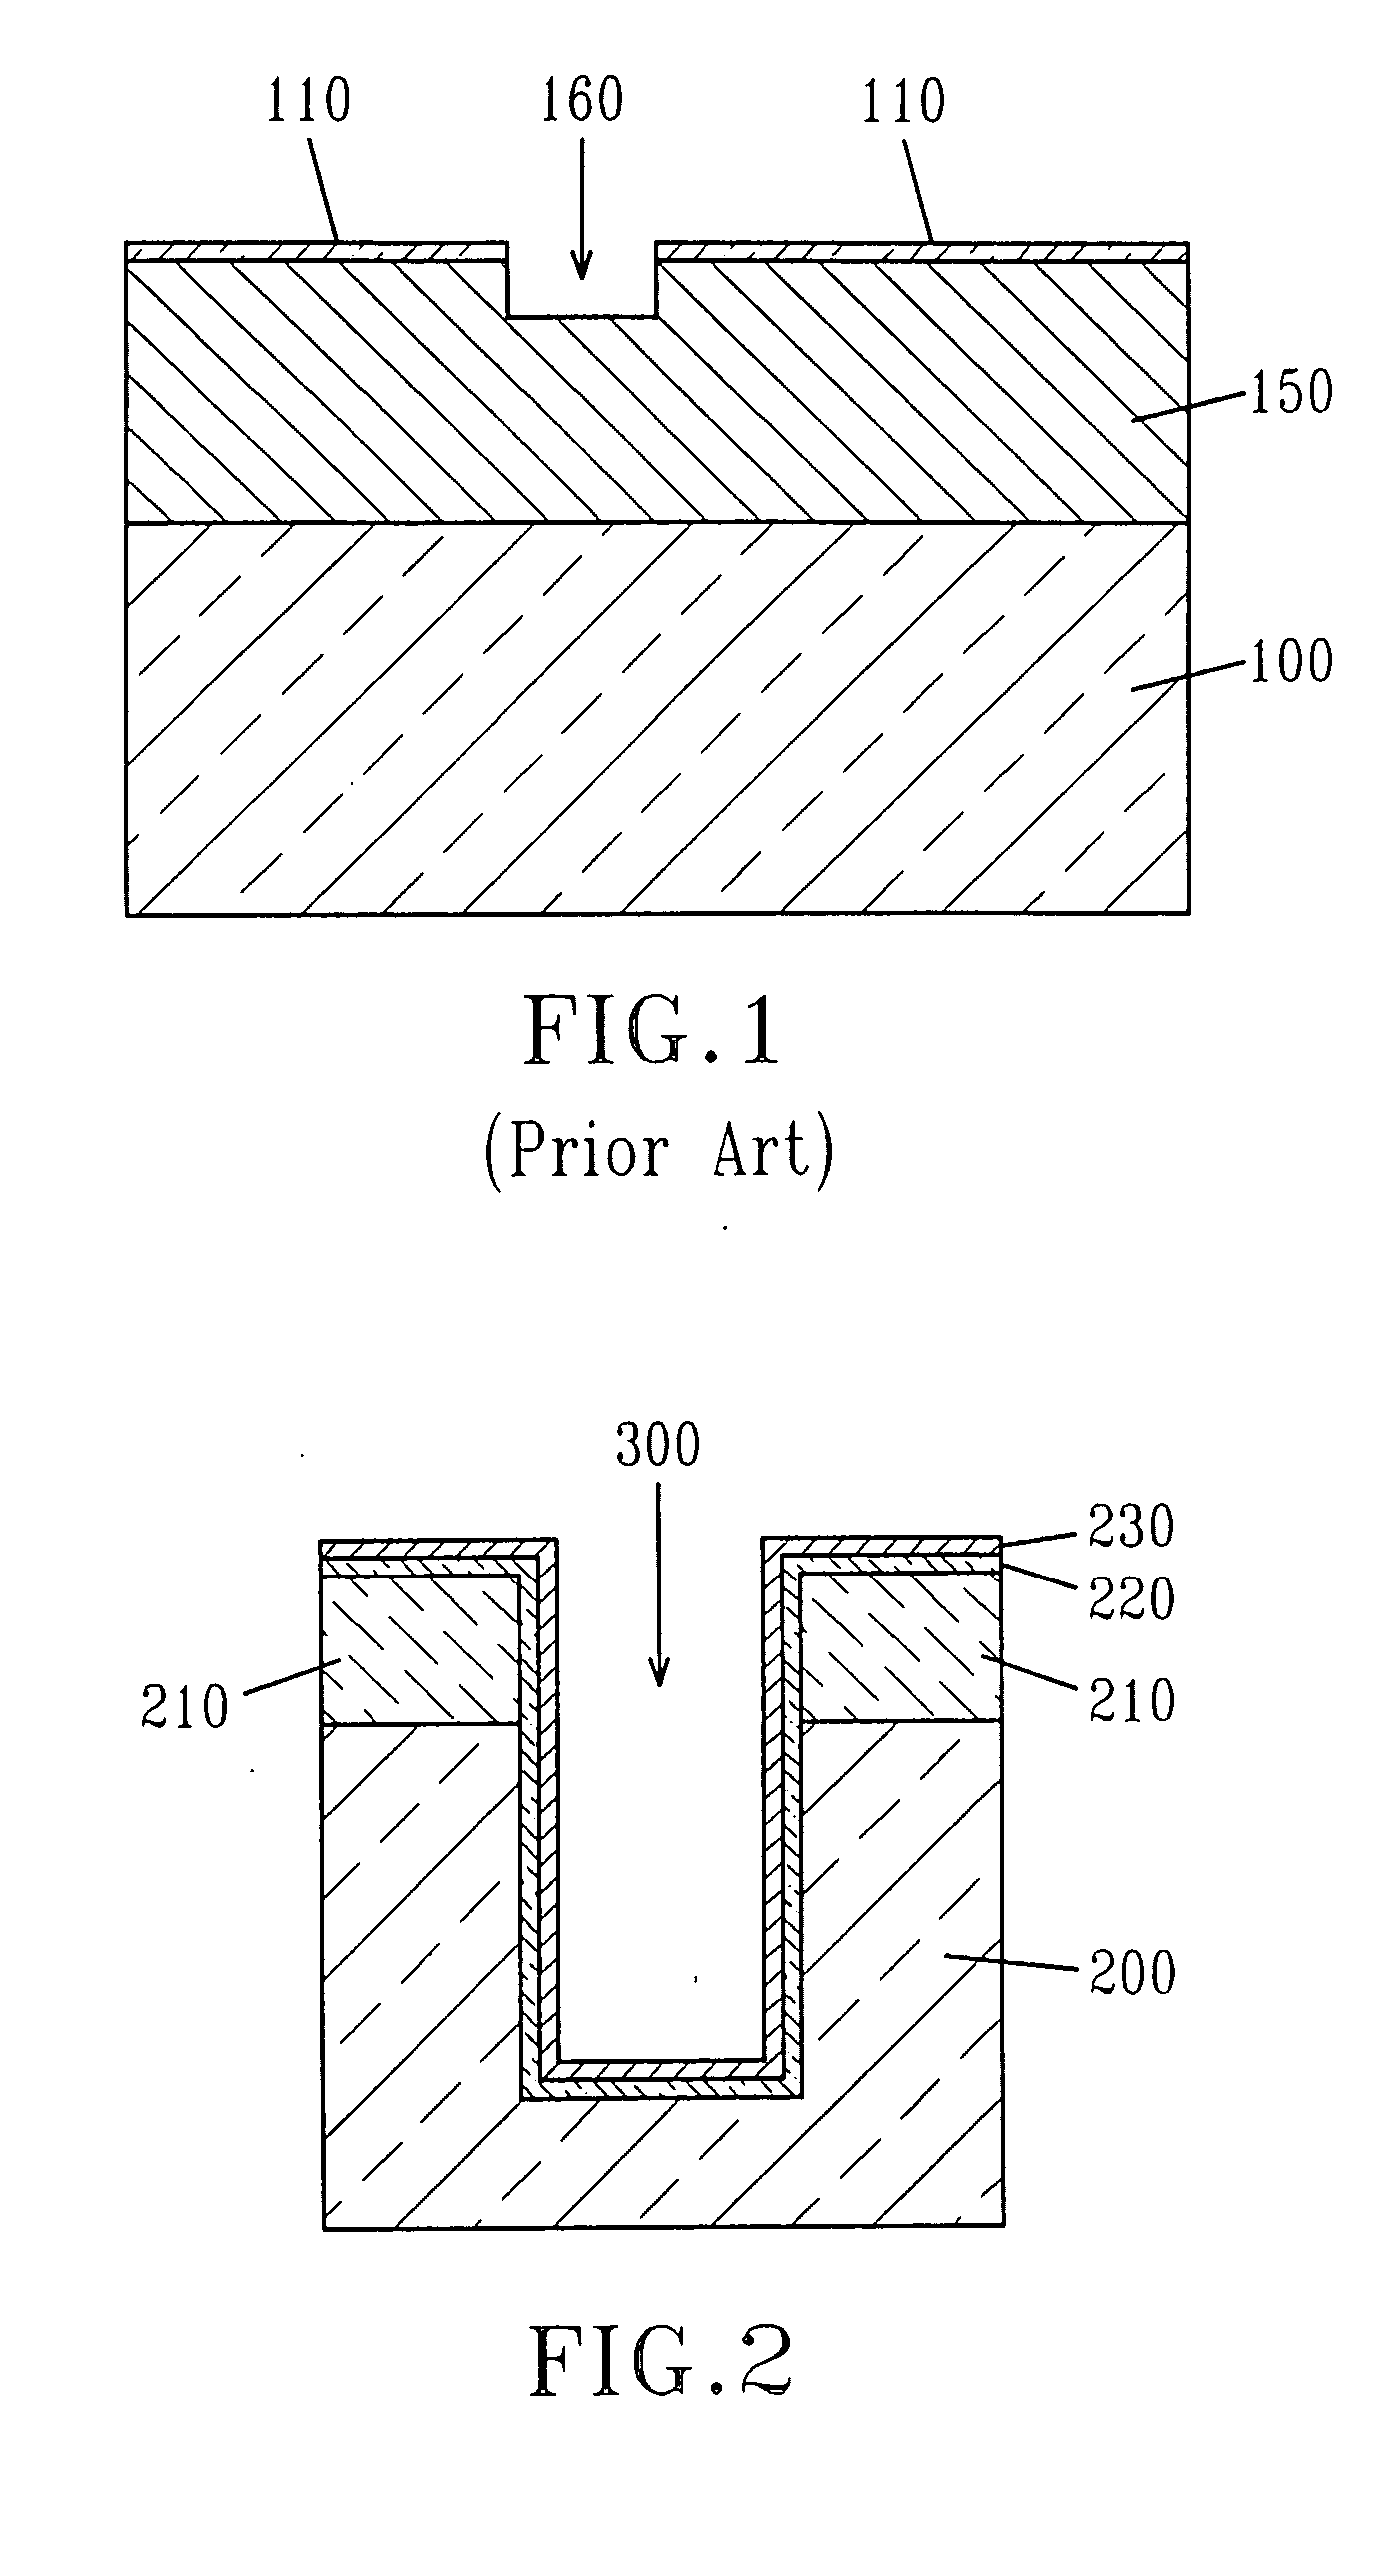 Silicon chip carrier with through-vias using laser assisted chemical vapor deposition of conductor